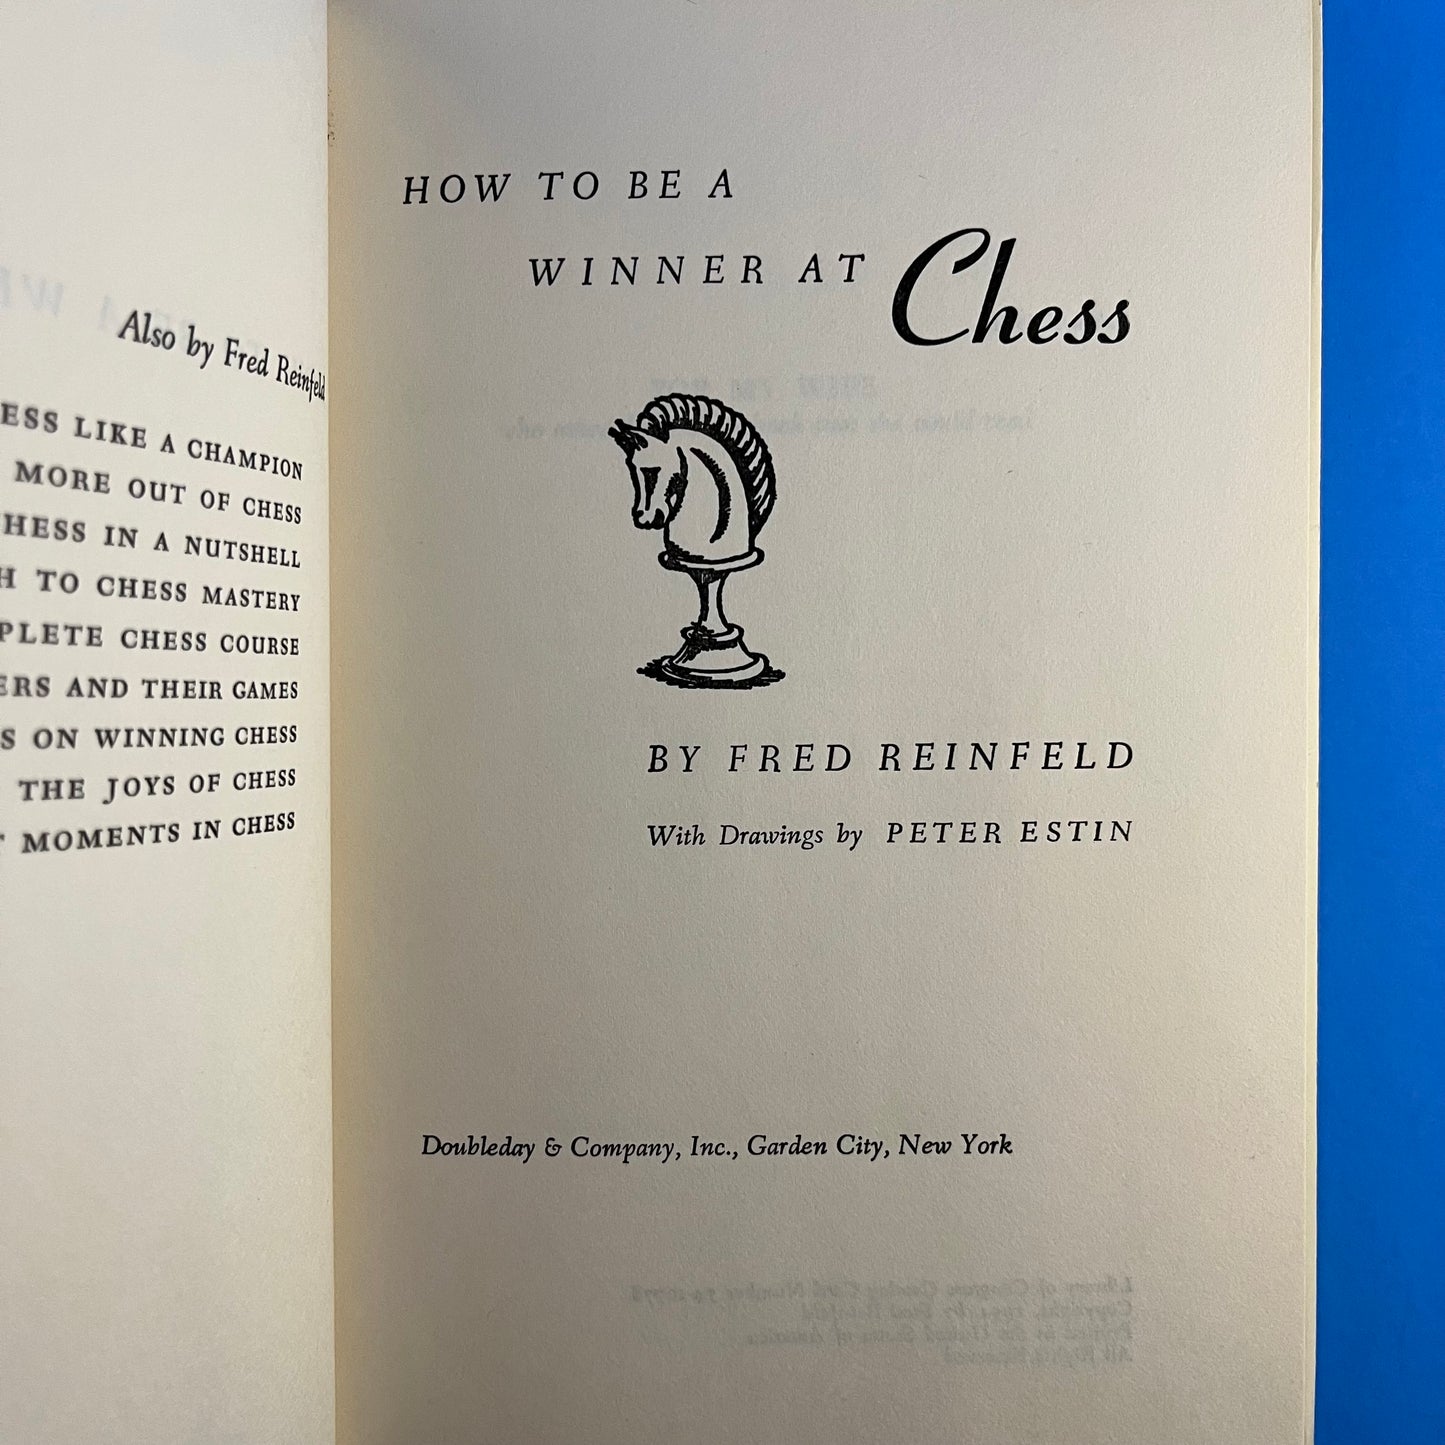 How to be a Winner at Chess